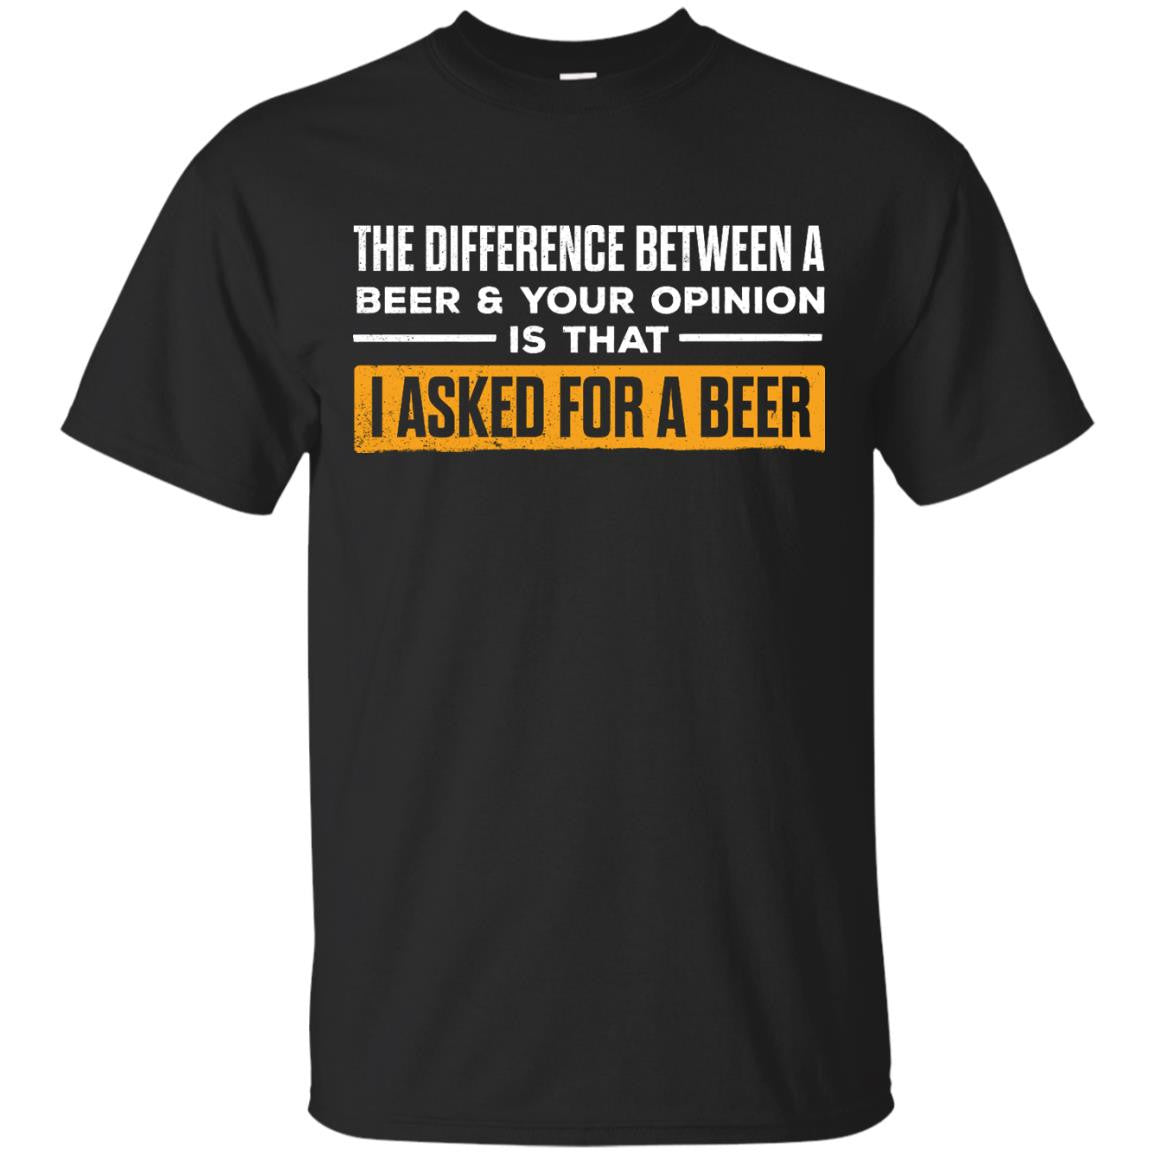 The Difference Between A Beer & Your Opinion Is That I Asked For A Beer T-Shirt Apparel - The Beer Lodge